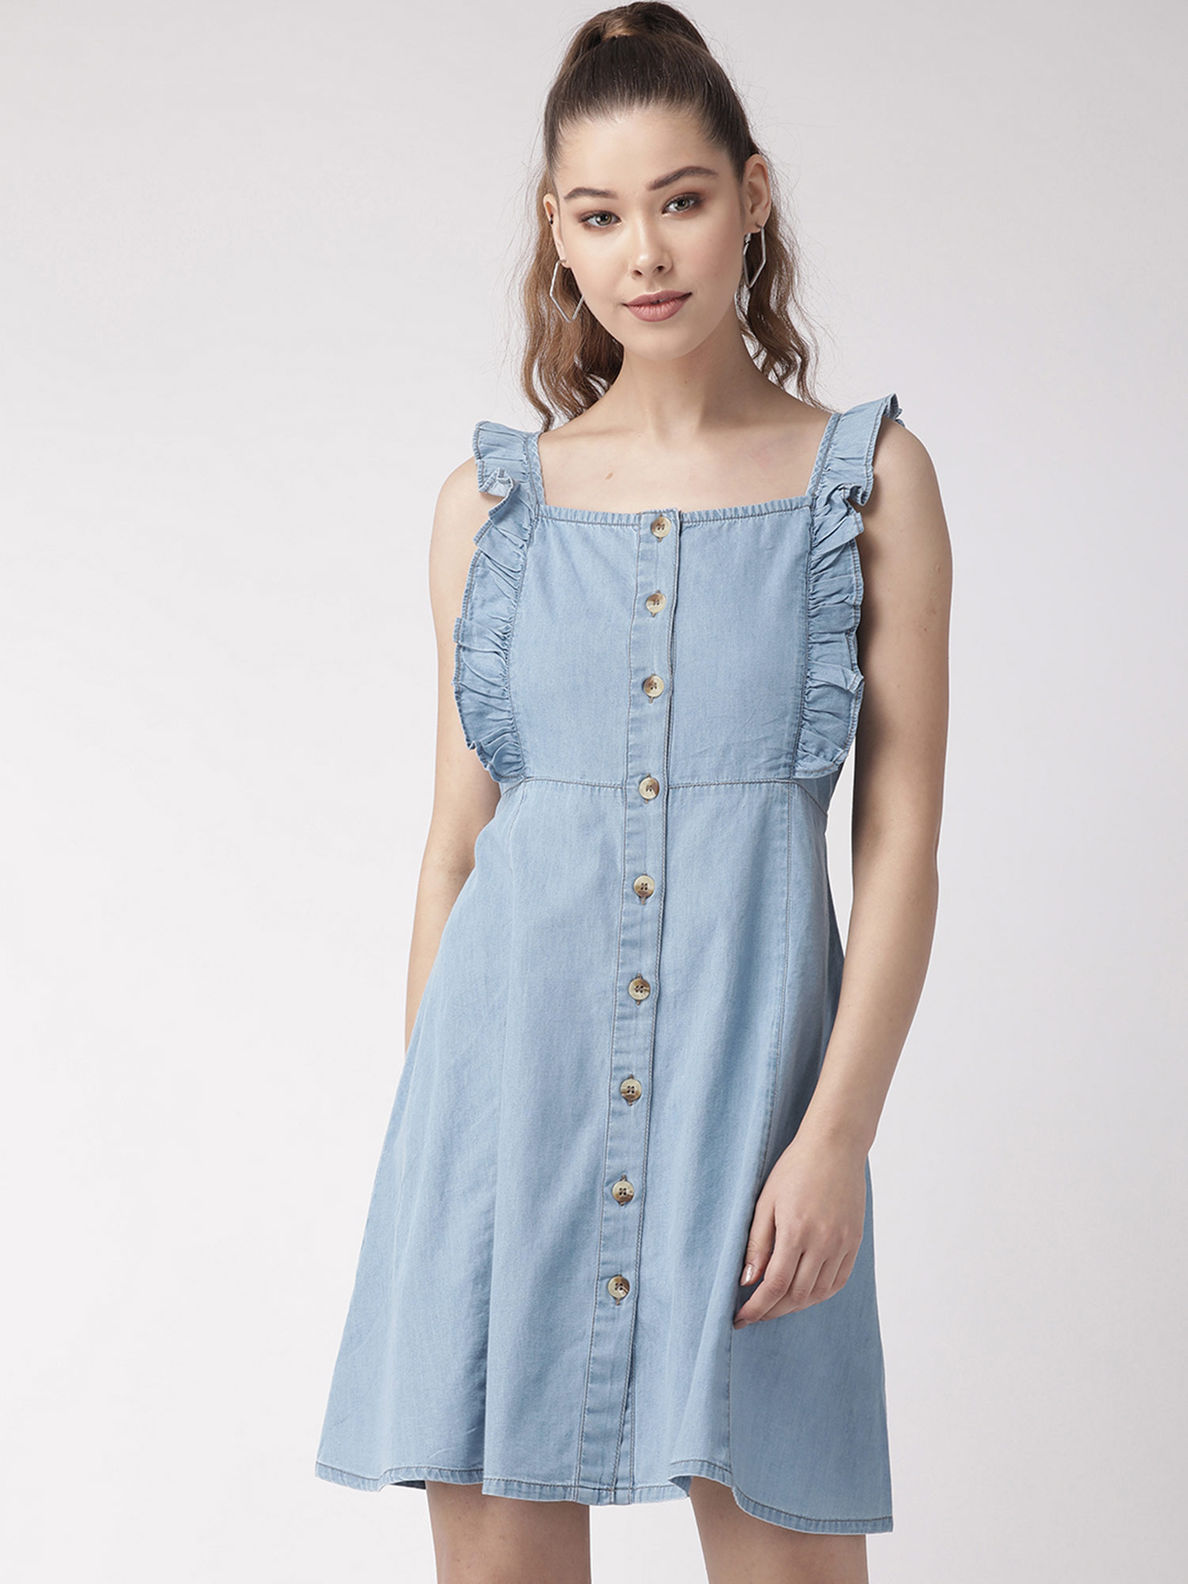 Forever 21 Denim Dress Outfit - Baubles to Bubbles